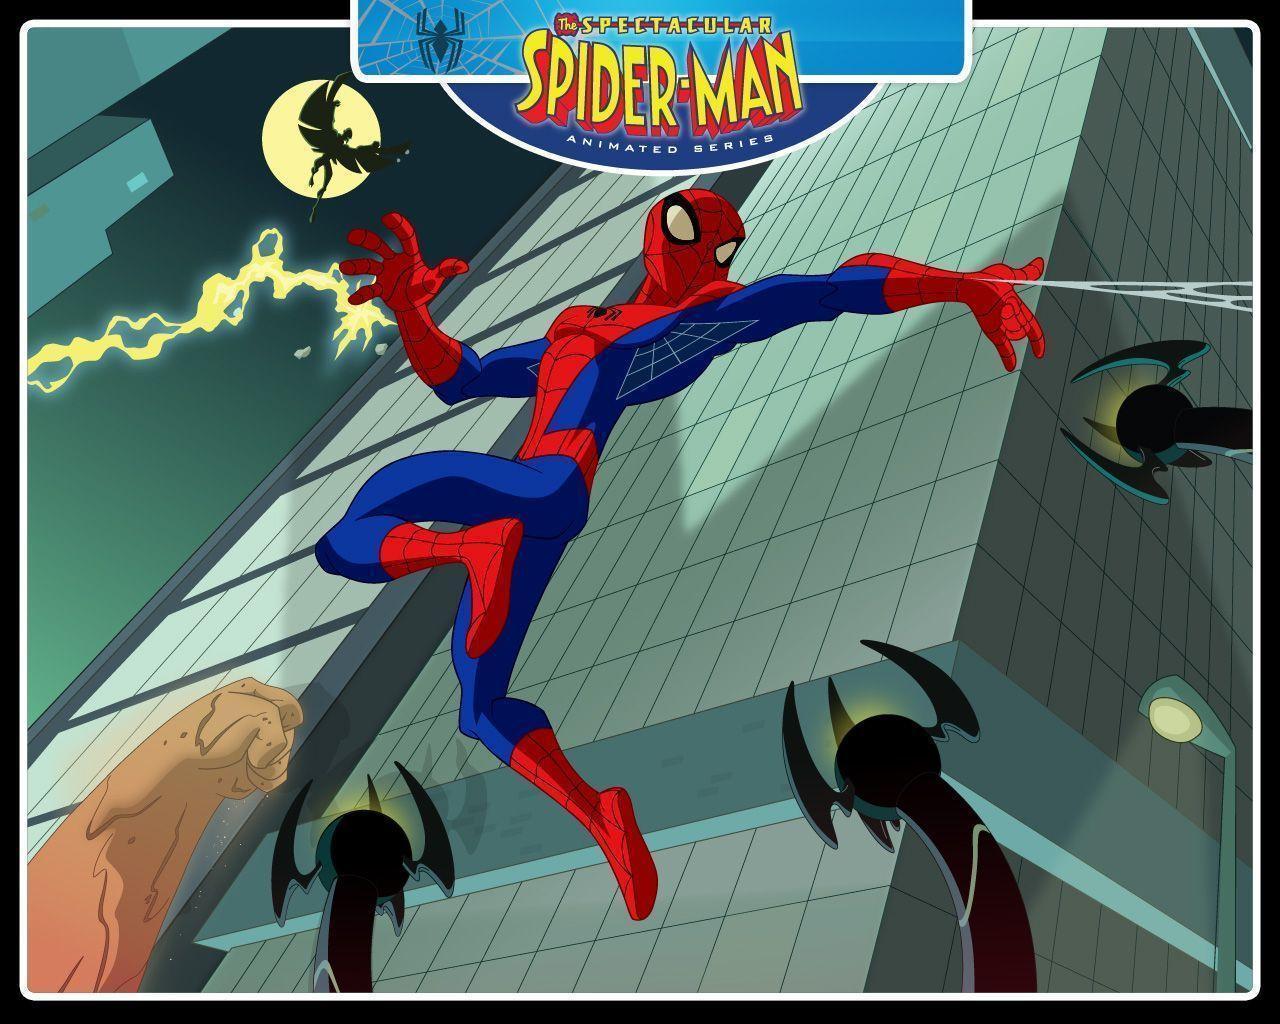 The Spectacular Spiderman Downloads